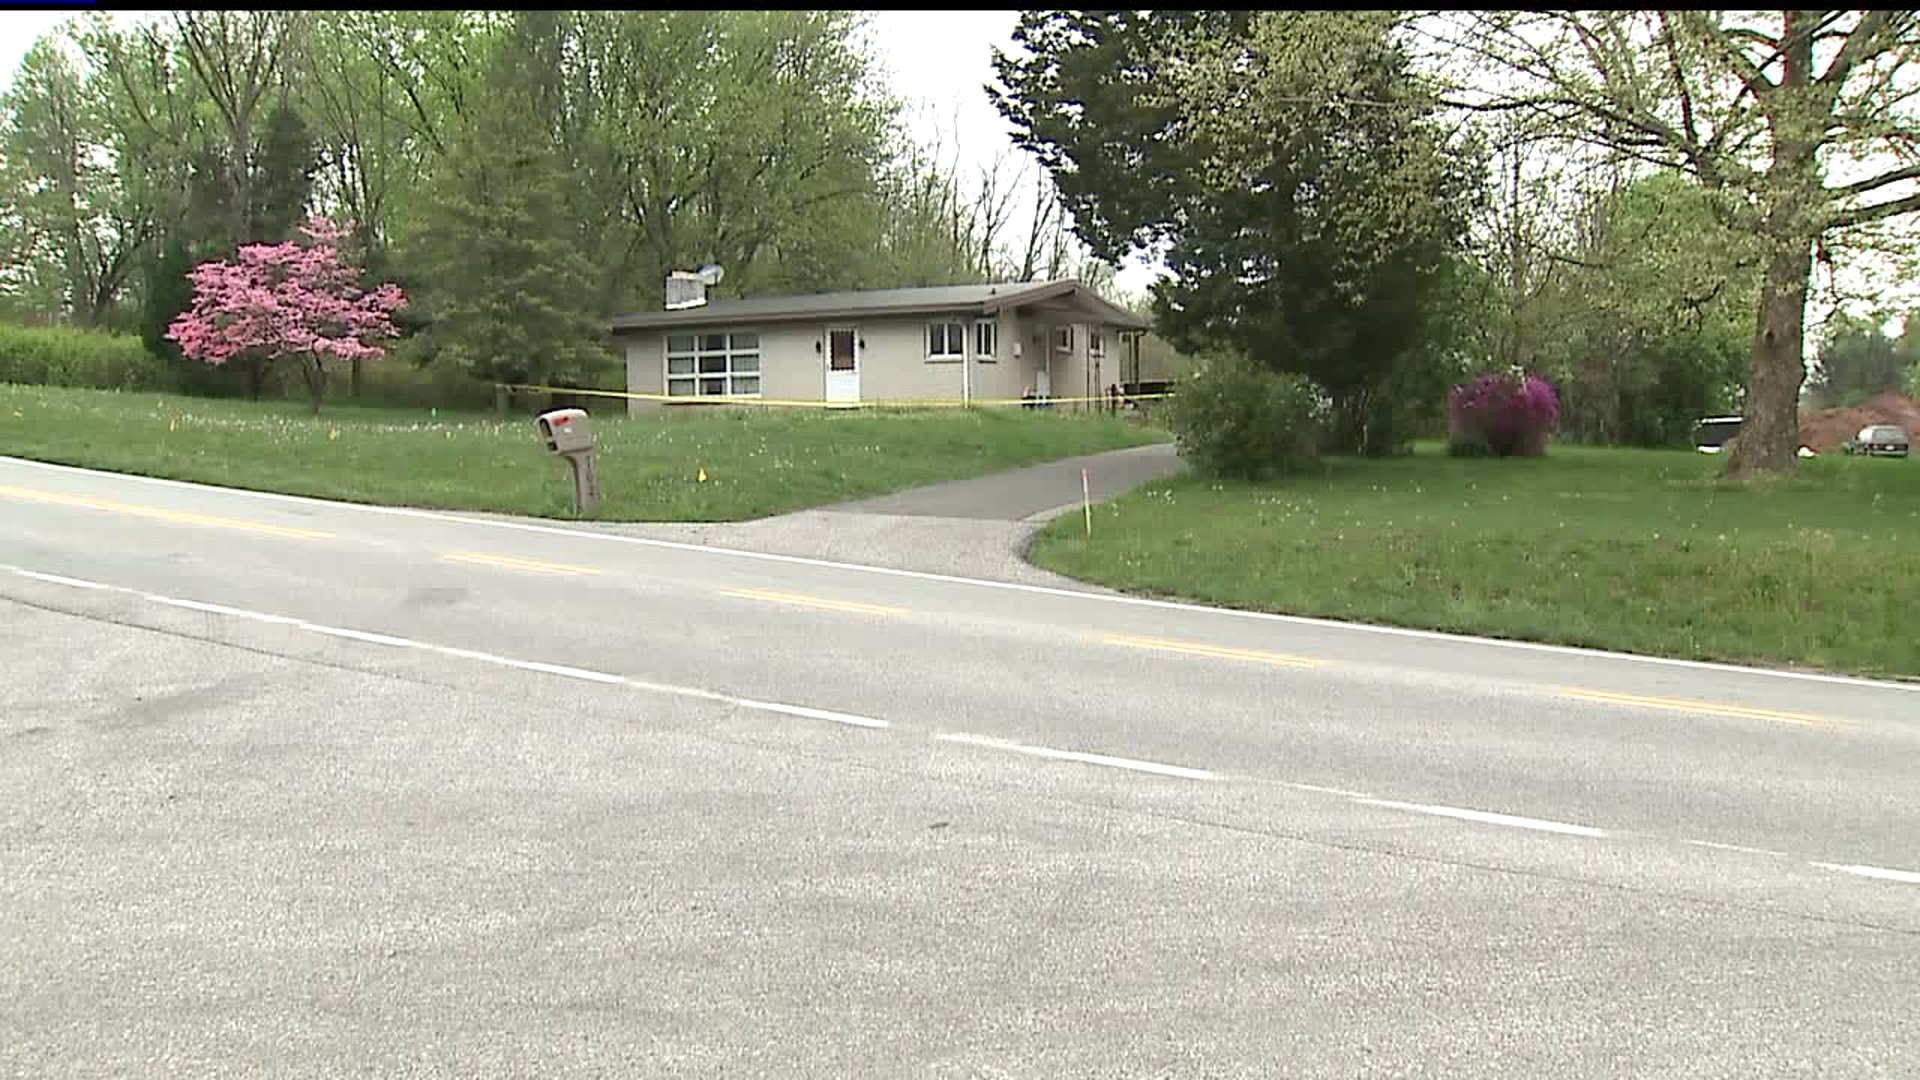 Neighbors horrified by murder-suicide in York Co.